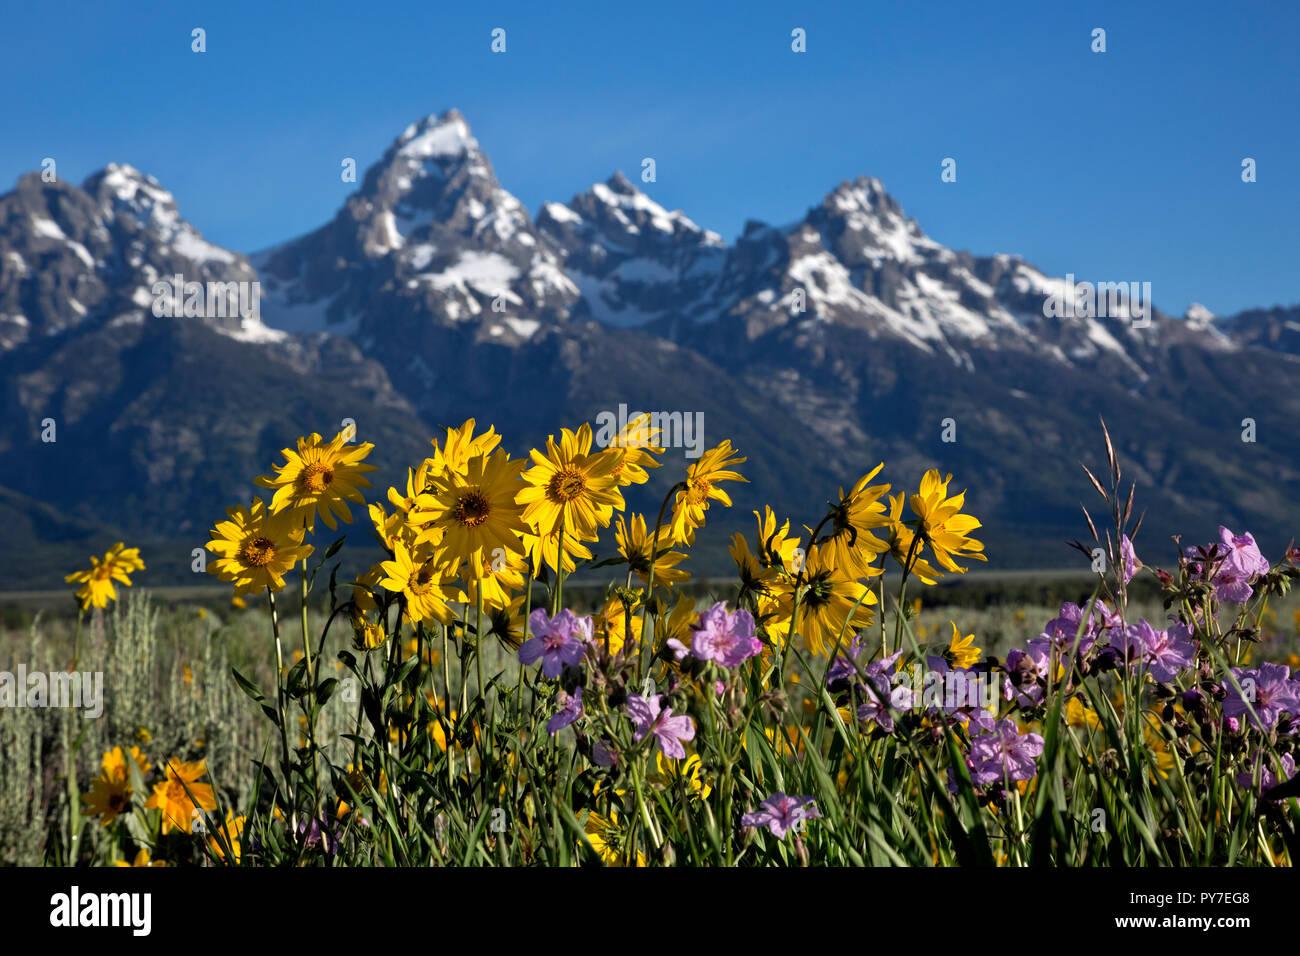 WY02527-00...WYOMING - Arrowleaf balsamroot and sticky geranium blooming in the Antelope Flats area of Jackson Hole in Grand Teton National Park. Stock Photo